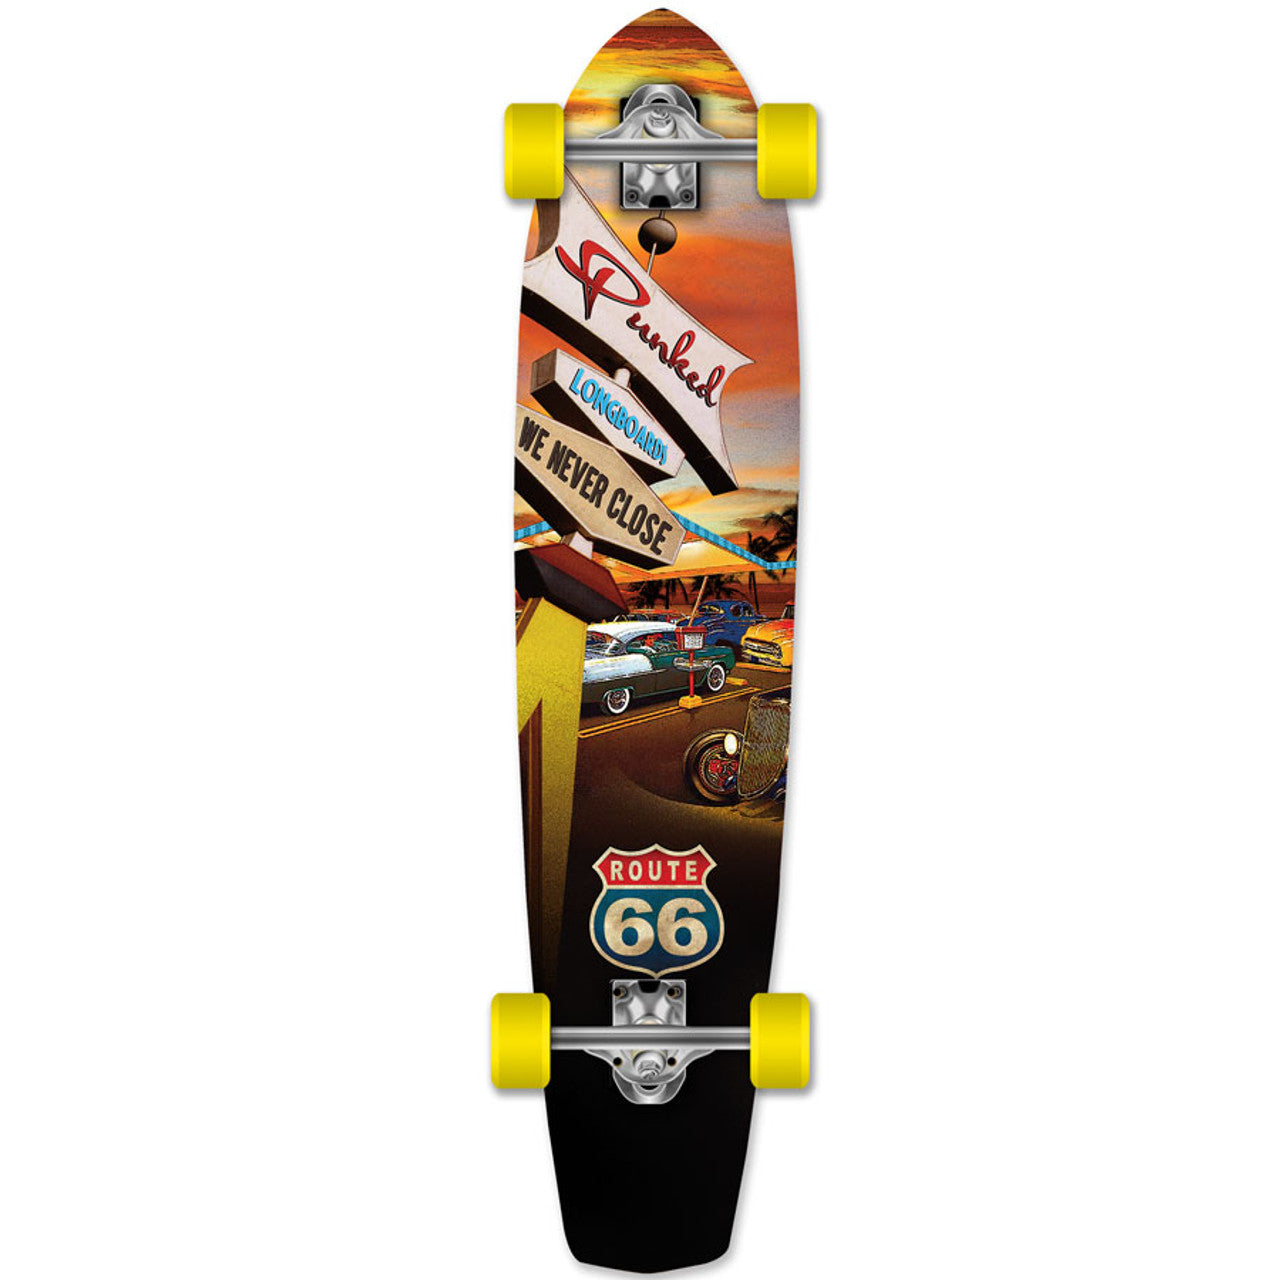 Yocaher Slimkick Longboard Complete - Route 66 Series - Diner